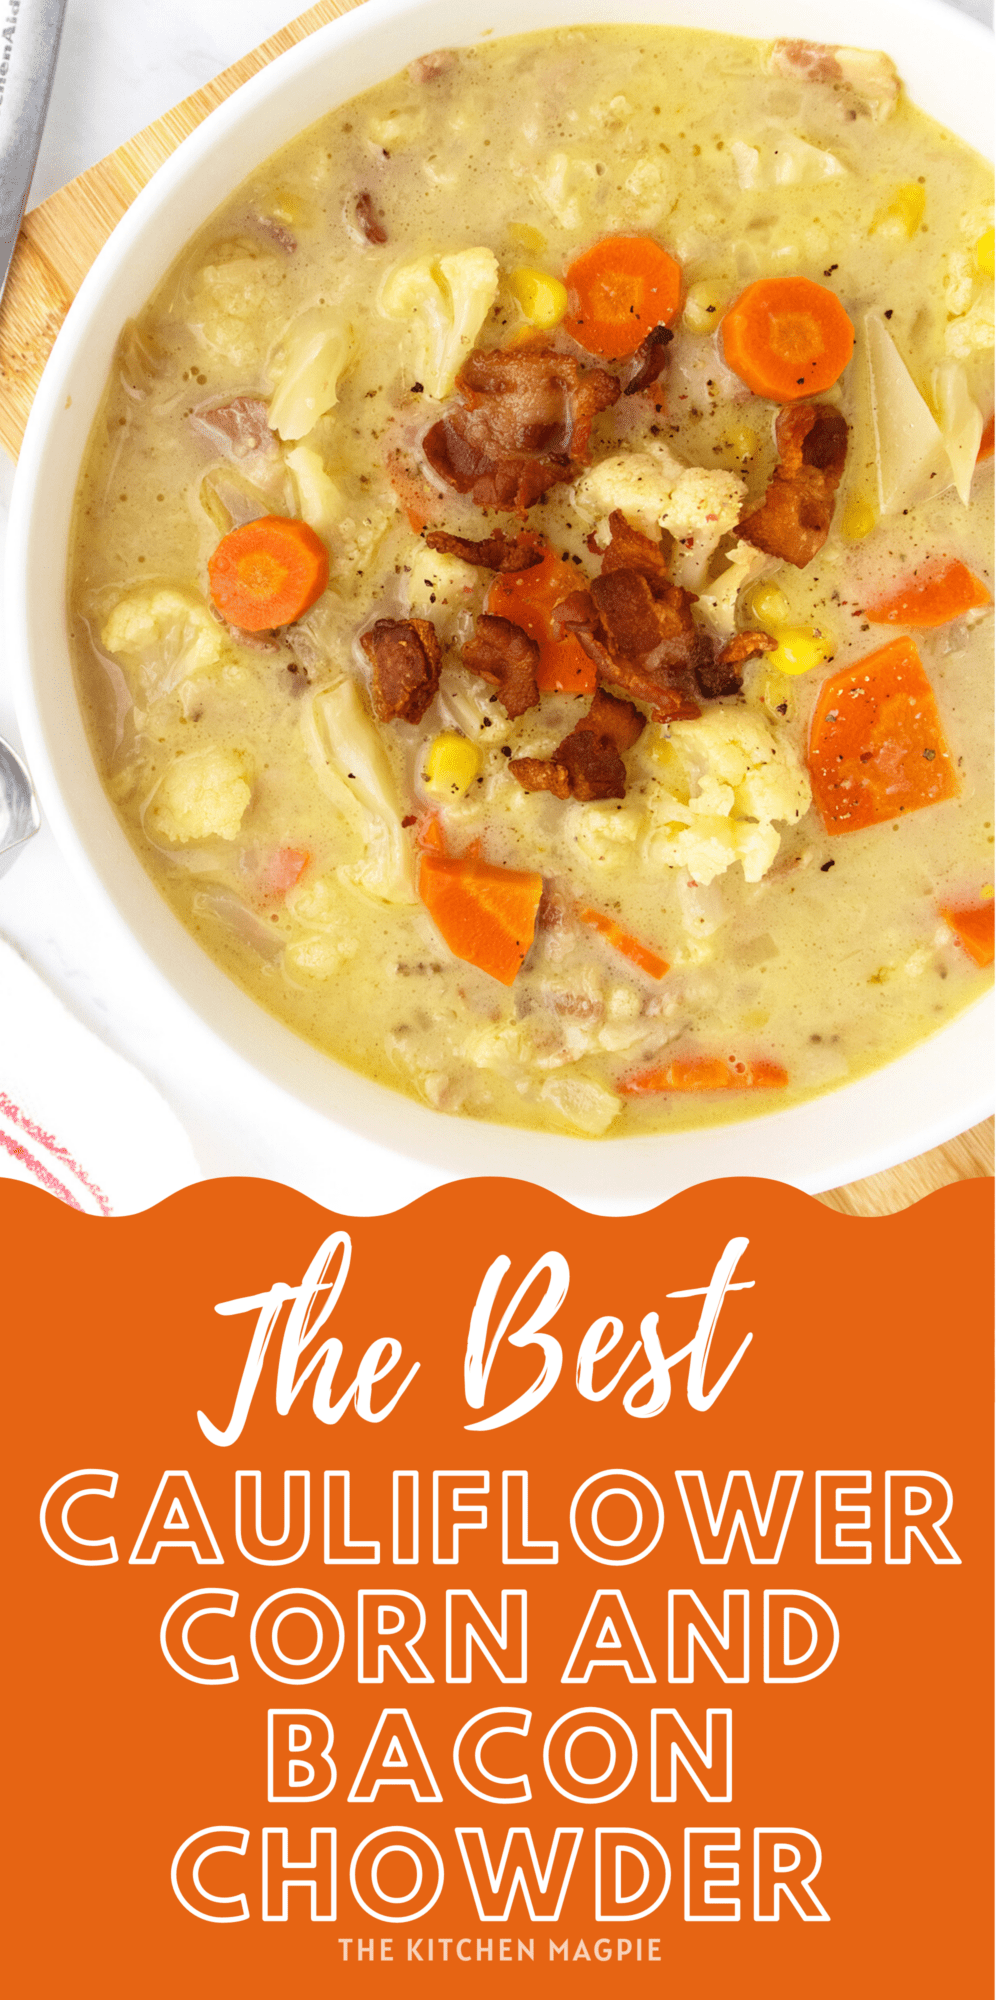 Amazing chowder that uses cauliflower instead of potatoes to create a creamy chowder that's not only better for you but absolutely delicious!